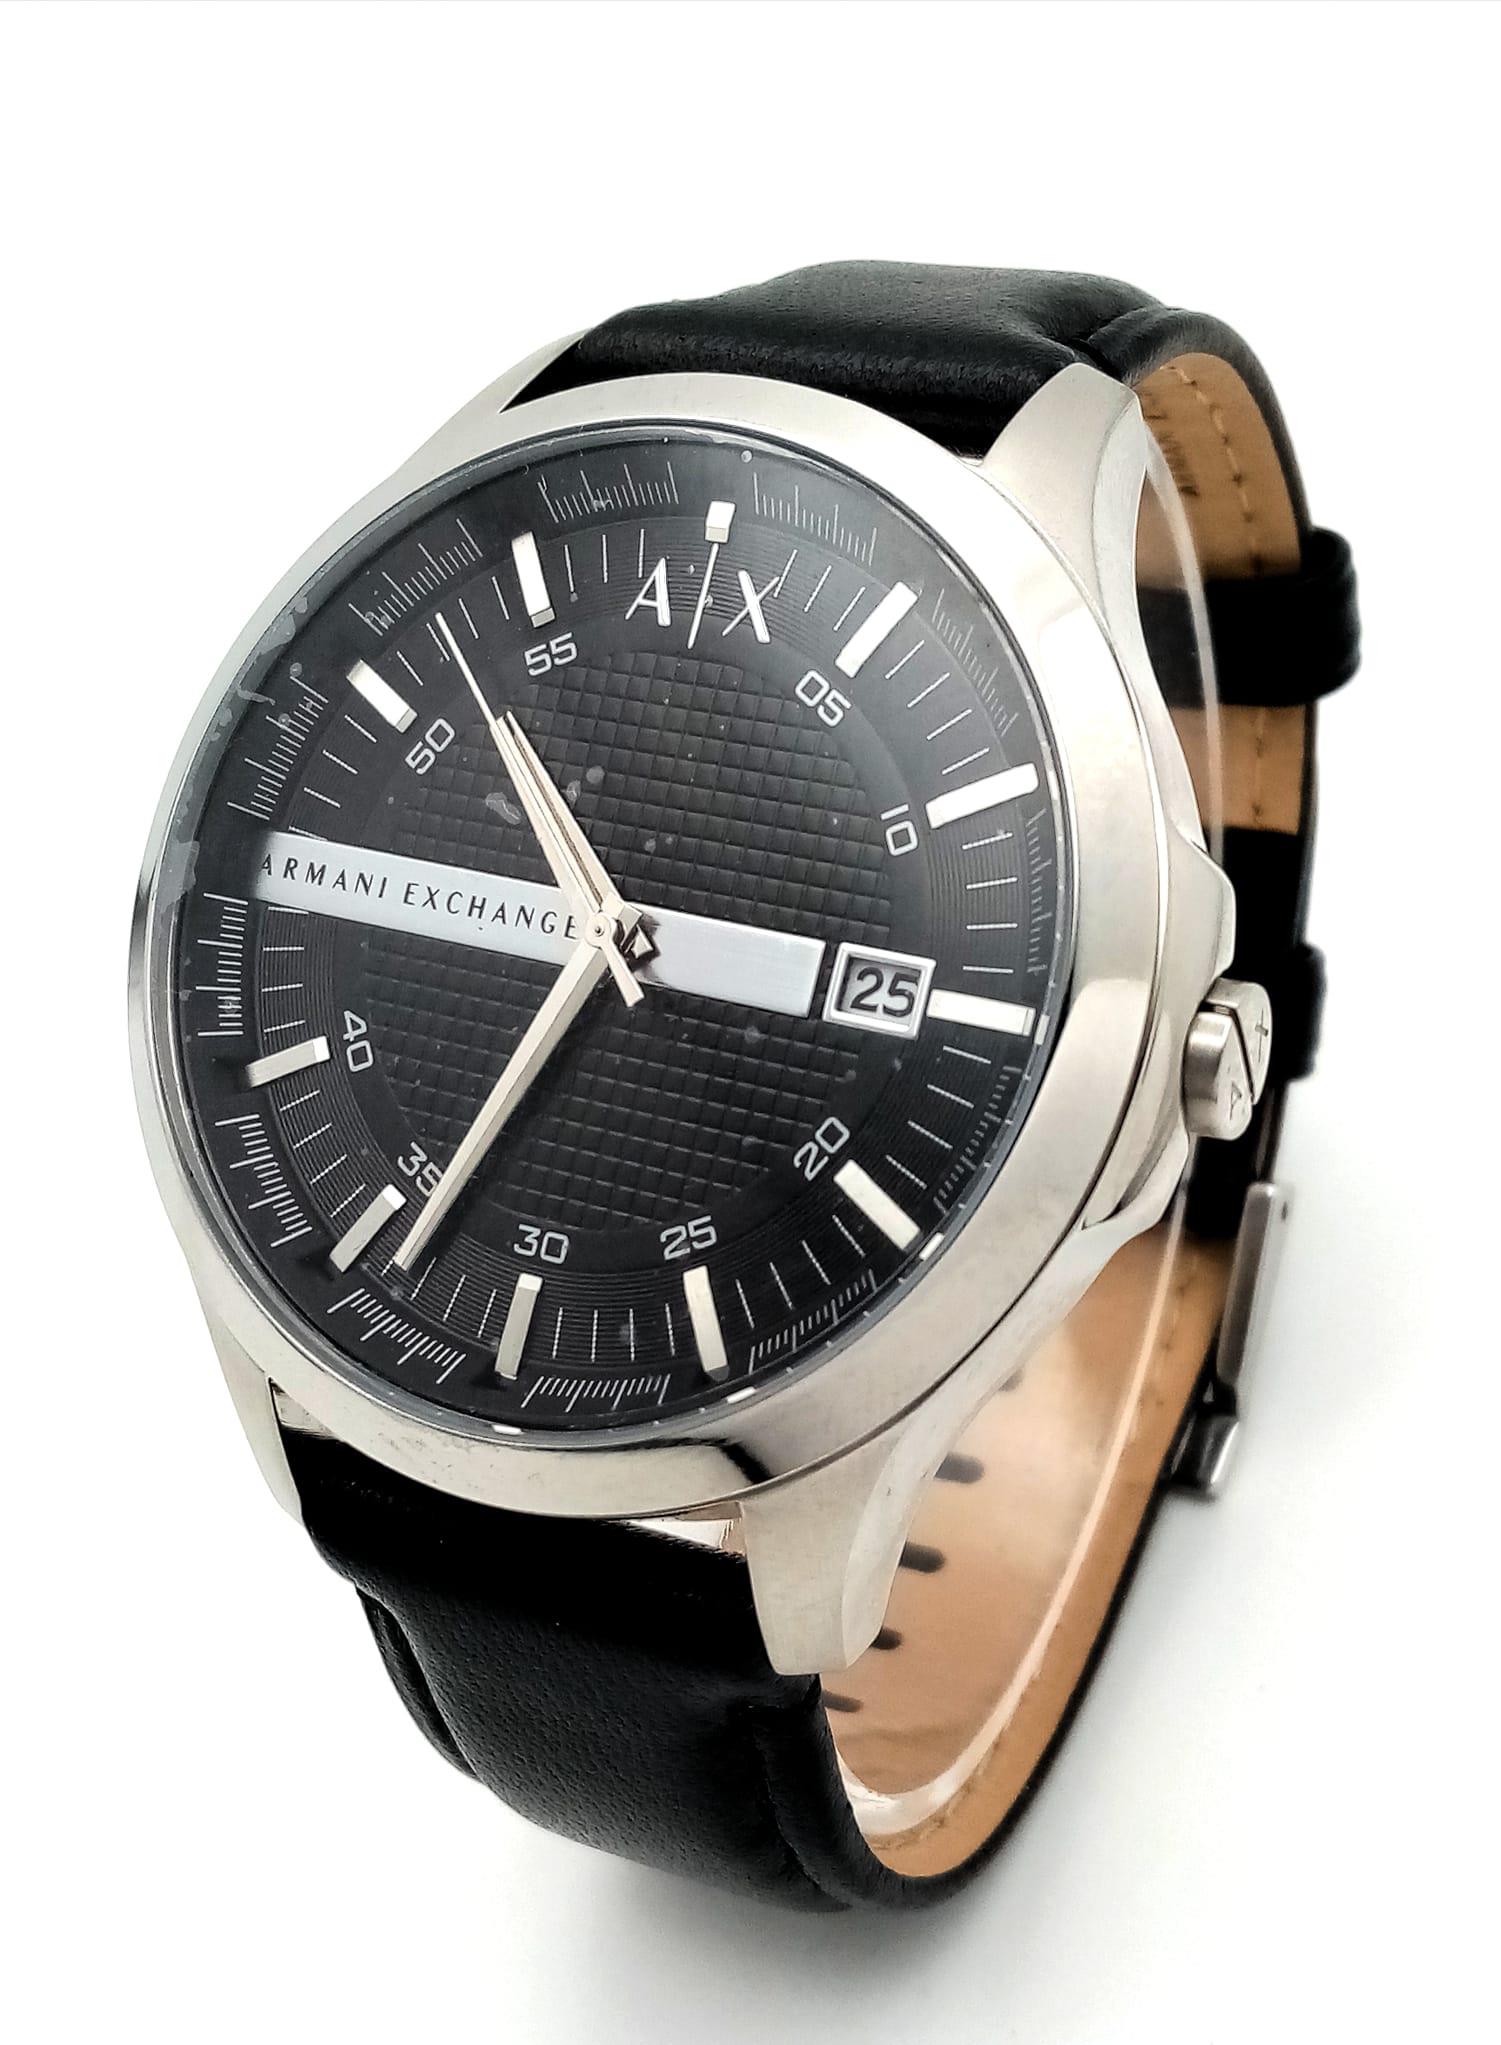 A New Armani Exchange Watch, Black and Chrome Dial, matching leather strap, Dial 42mm, Comes with